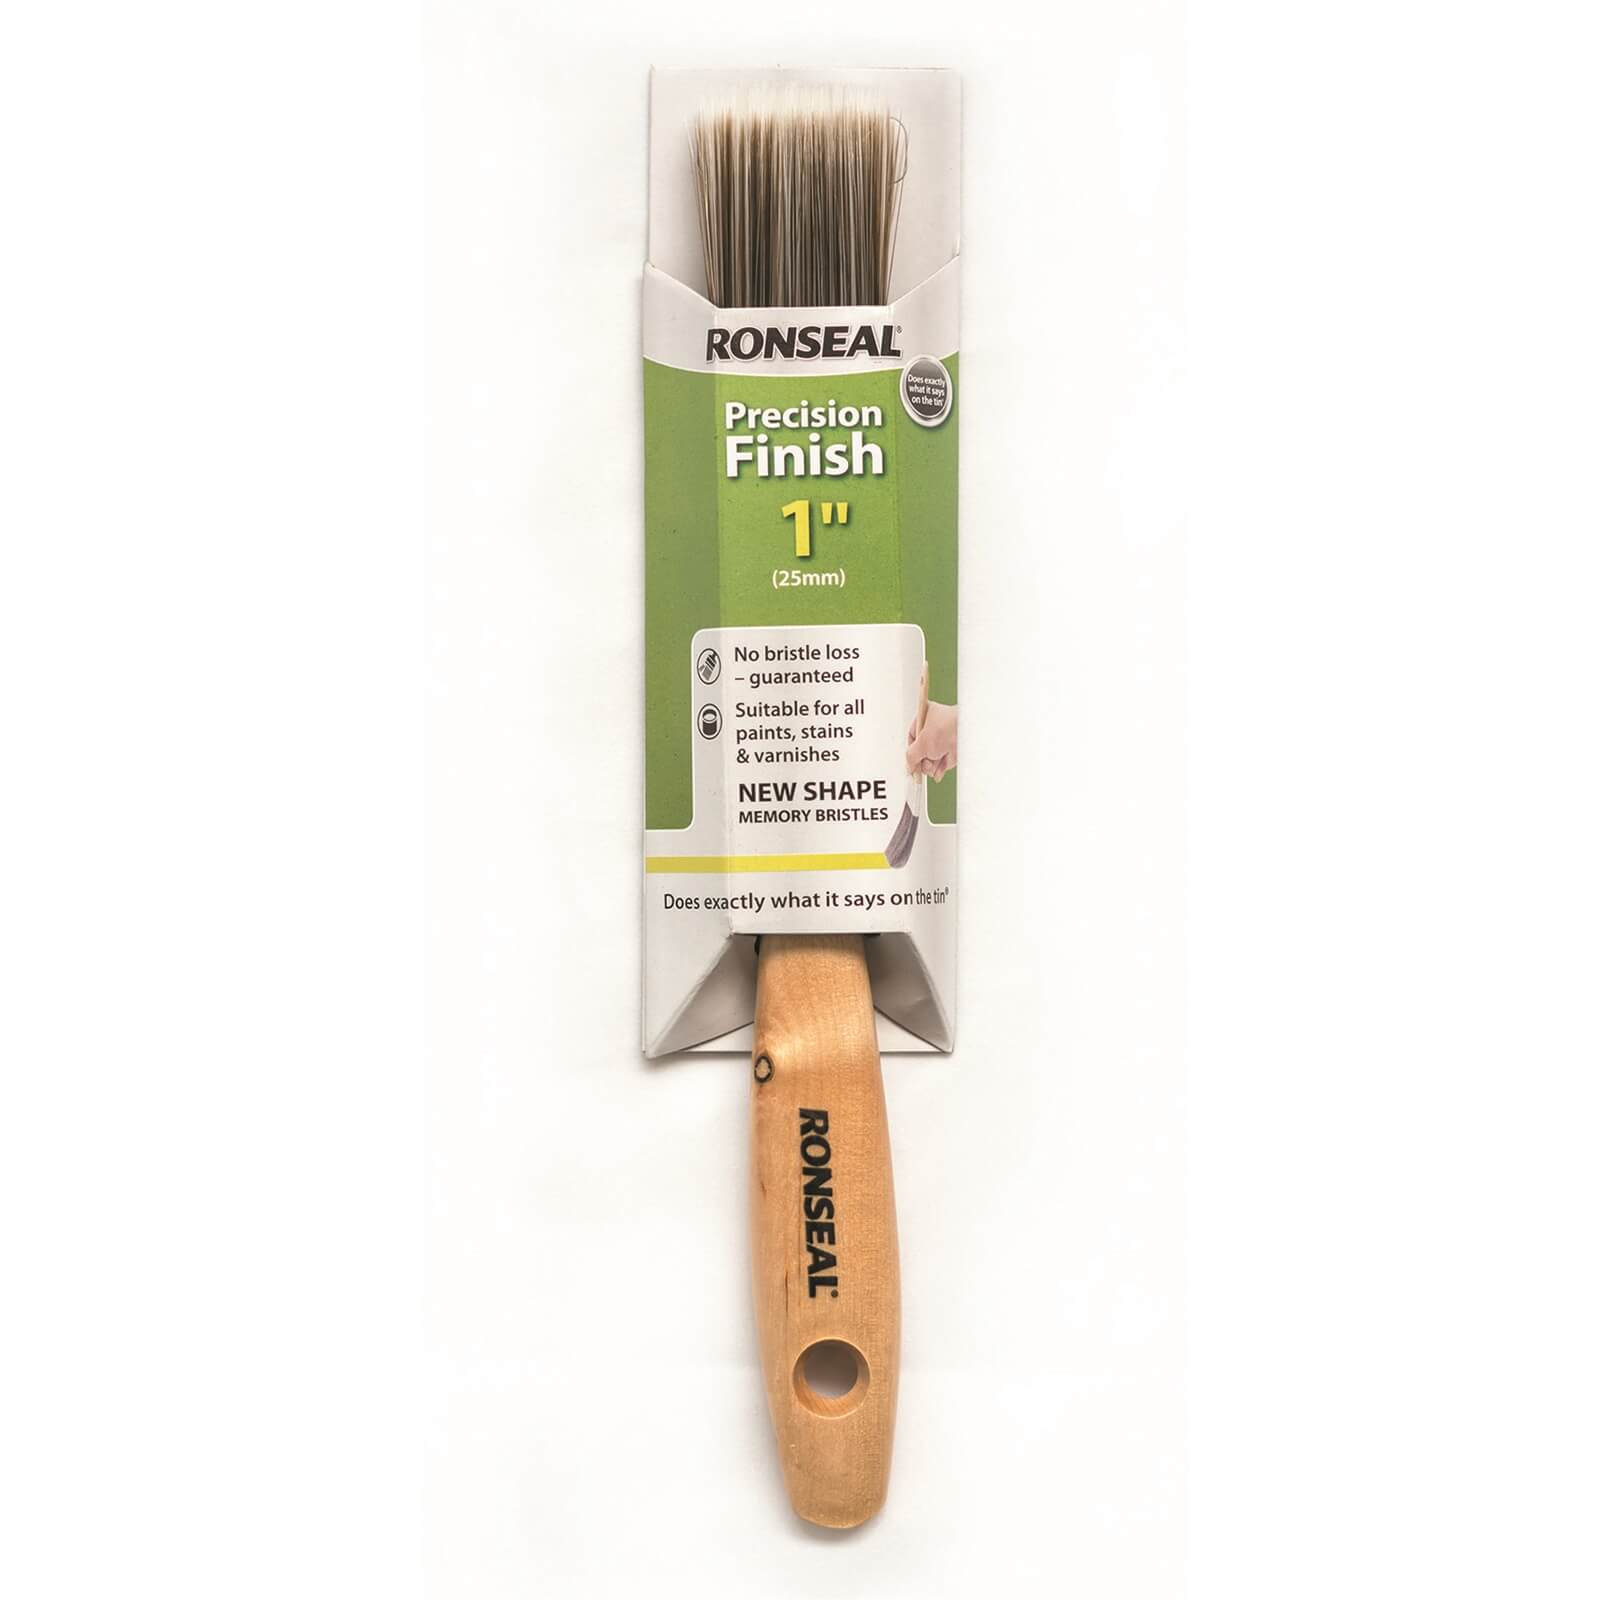 Ronseal Precision Finish Brush - 1in